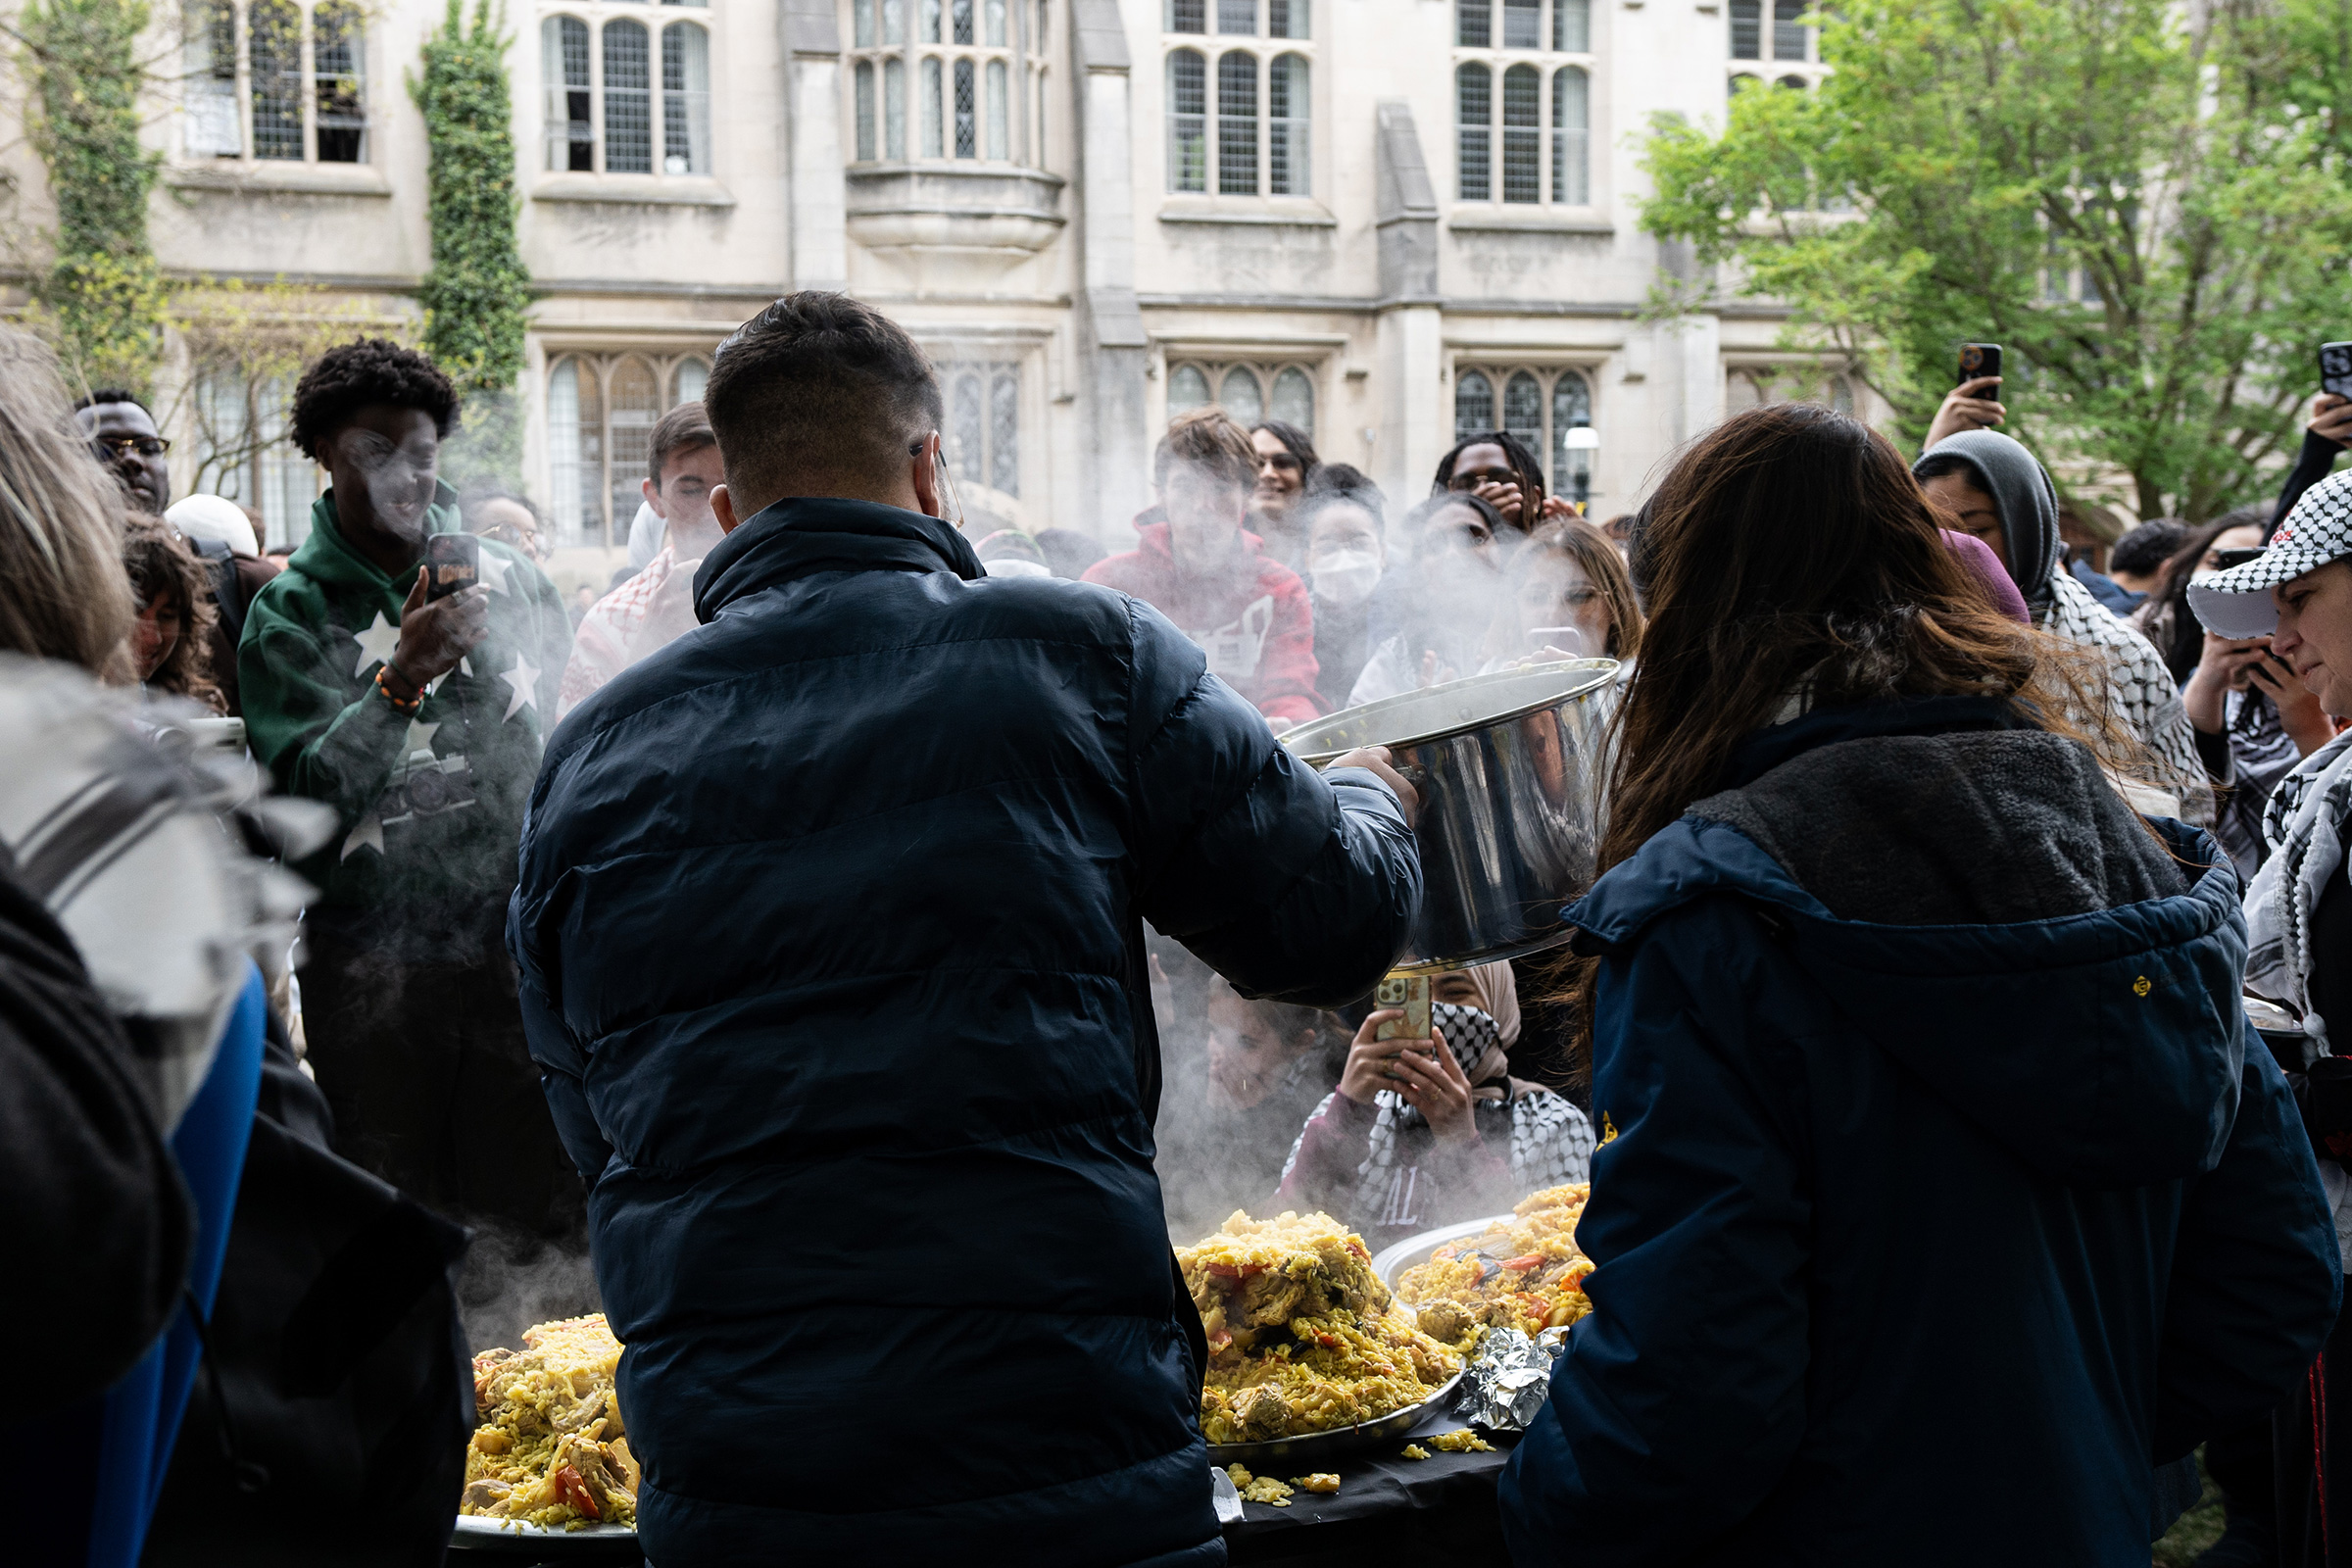 Maqlubah, a traditional Palestinian rice dish that means "something flipped upside down" in Arabic, is served at the Princeton “Gaza Solidarity Encampment” on April 28.